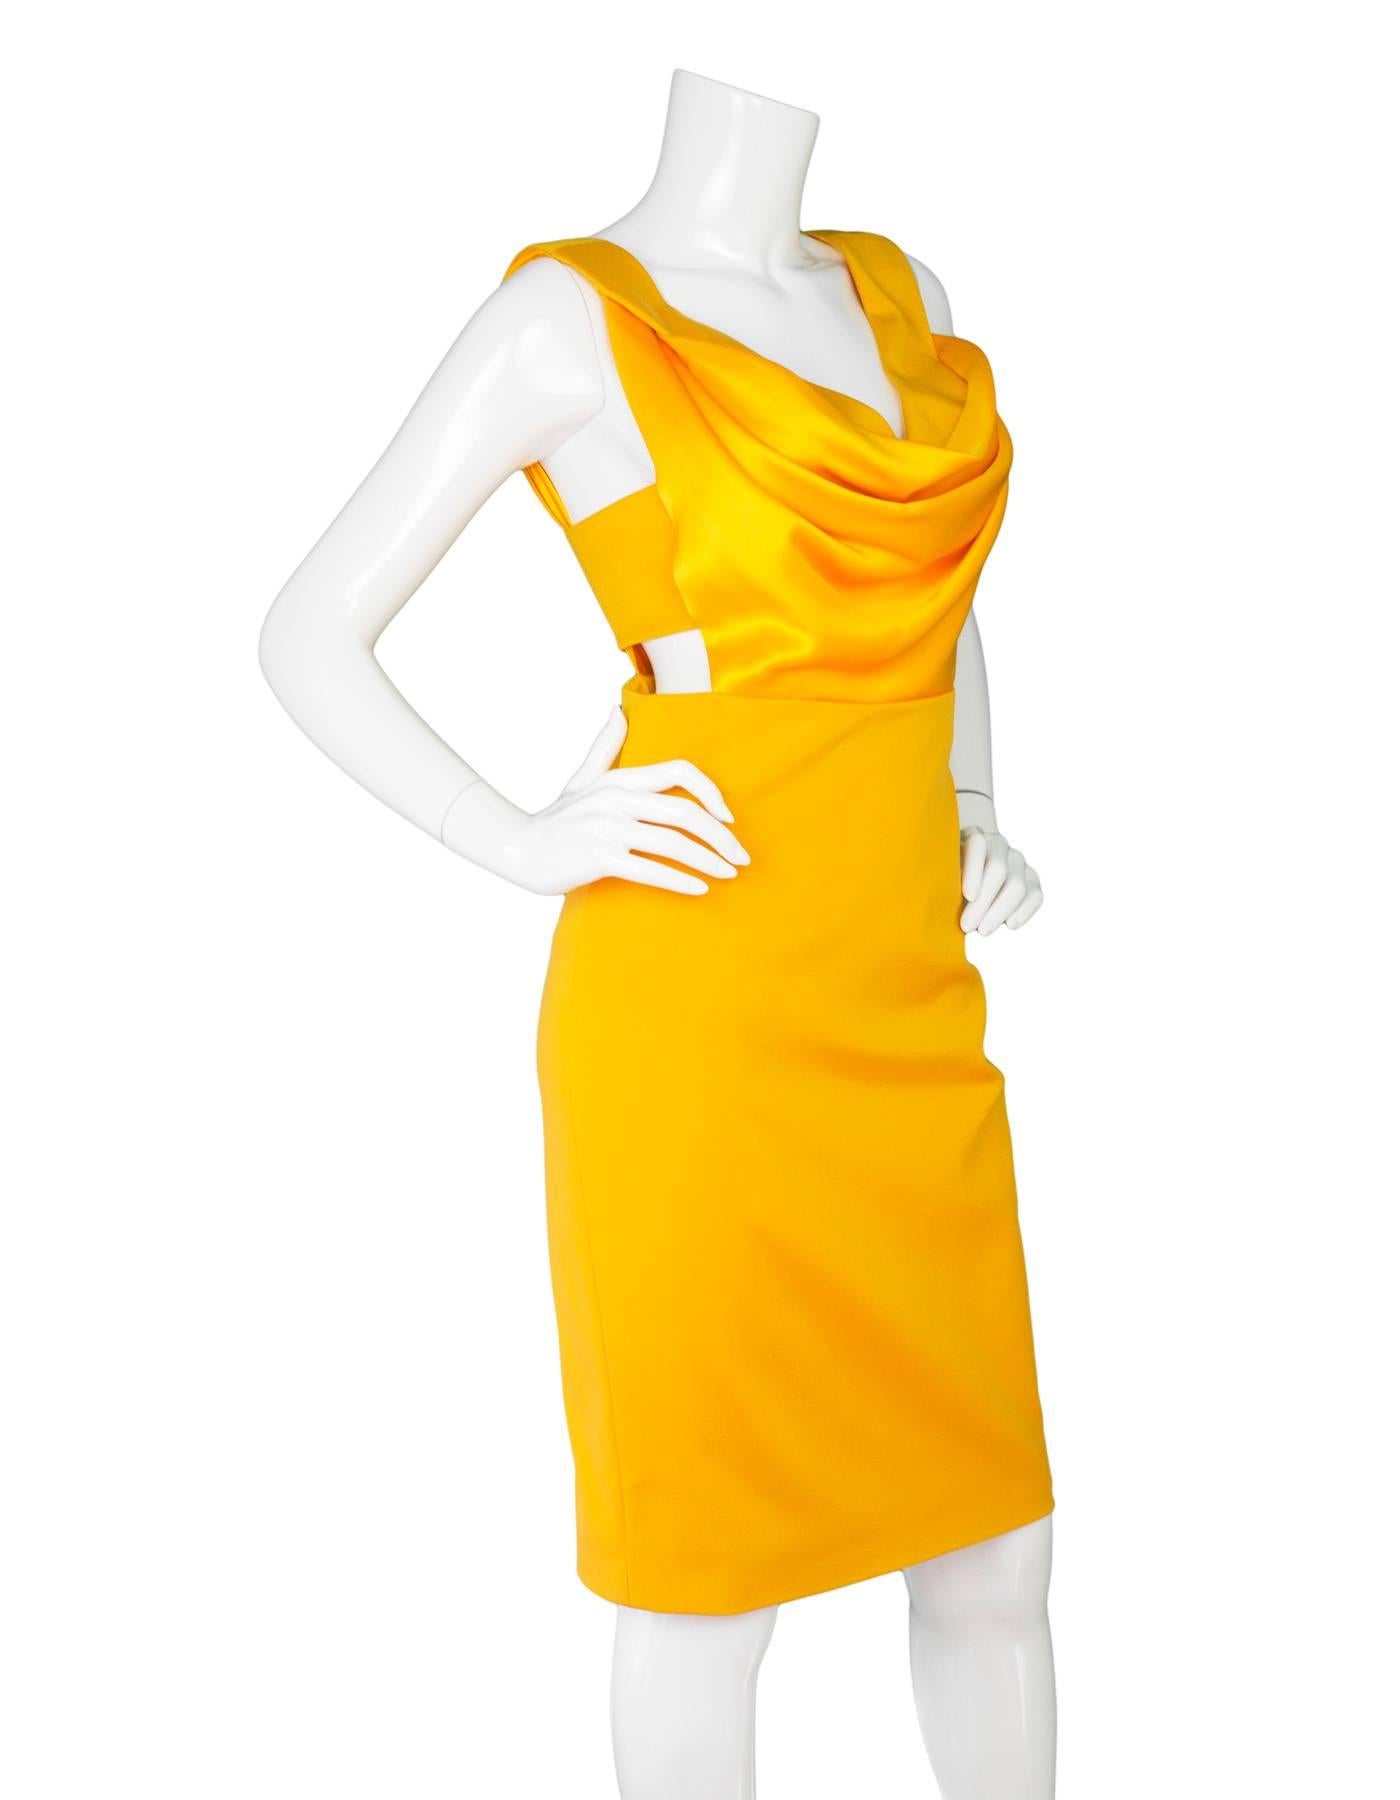 Cushnie ed Ochs Yellow Cut-Out Dress Sz 6

Made In: U.S.A.
Color: Yellow
Composition: 65% acetate, 29% nylon, 6% elastane
Lining: 94% silk, 6% elastane
Closure/Opening: Back zip closure
Overall Condition: Excellent pre-owned condition
Marked Size: